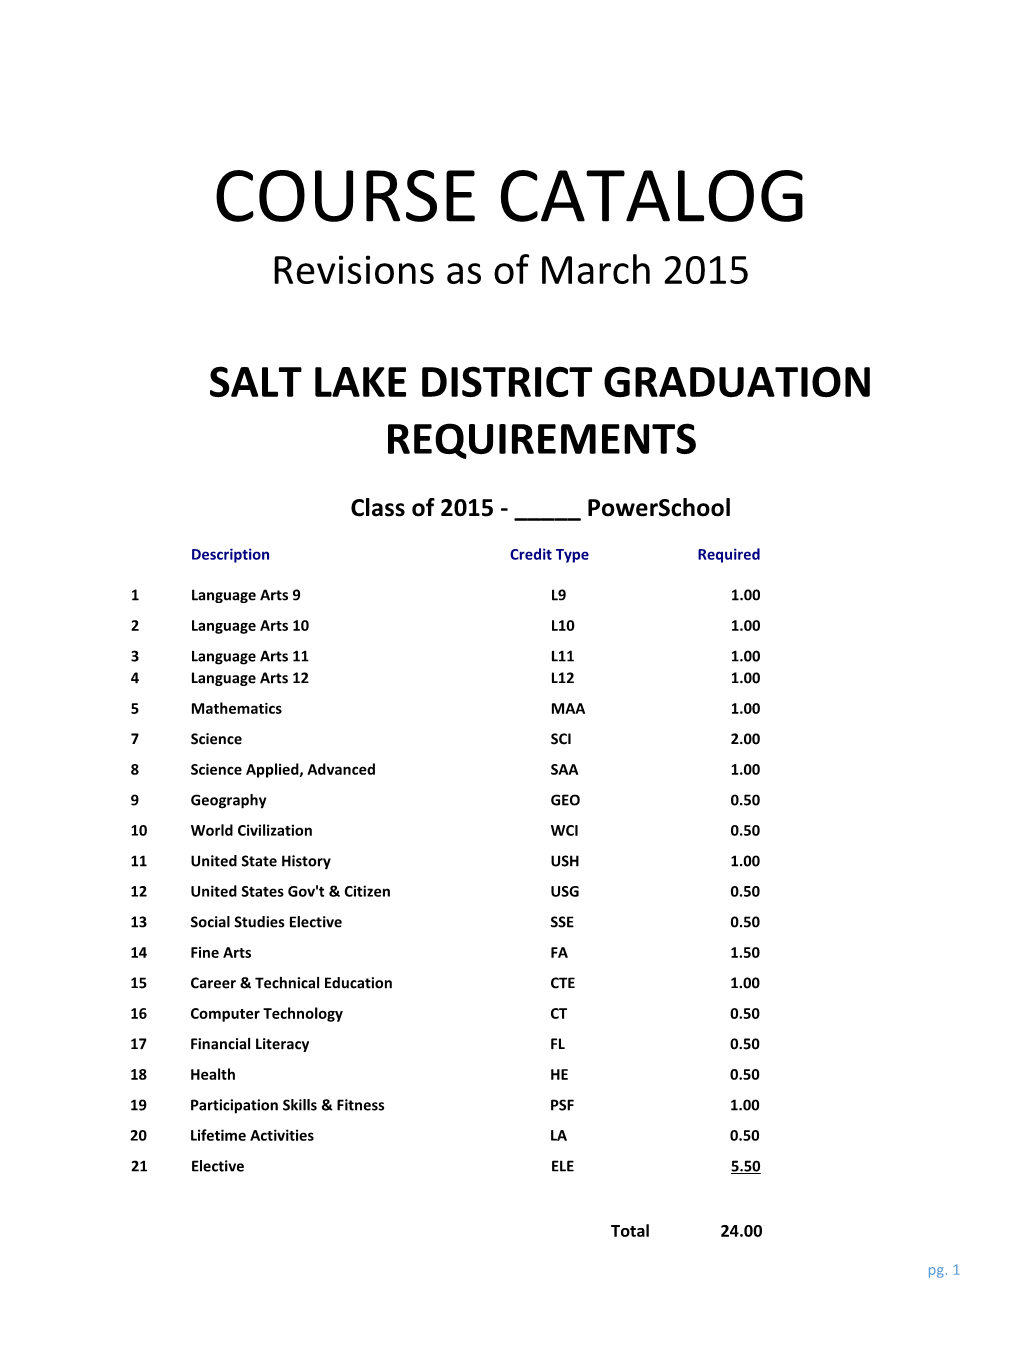 COURSE CATALOG Revisions As of March 2015